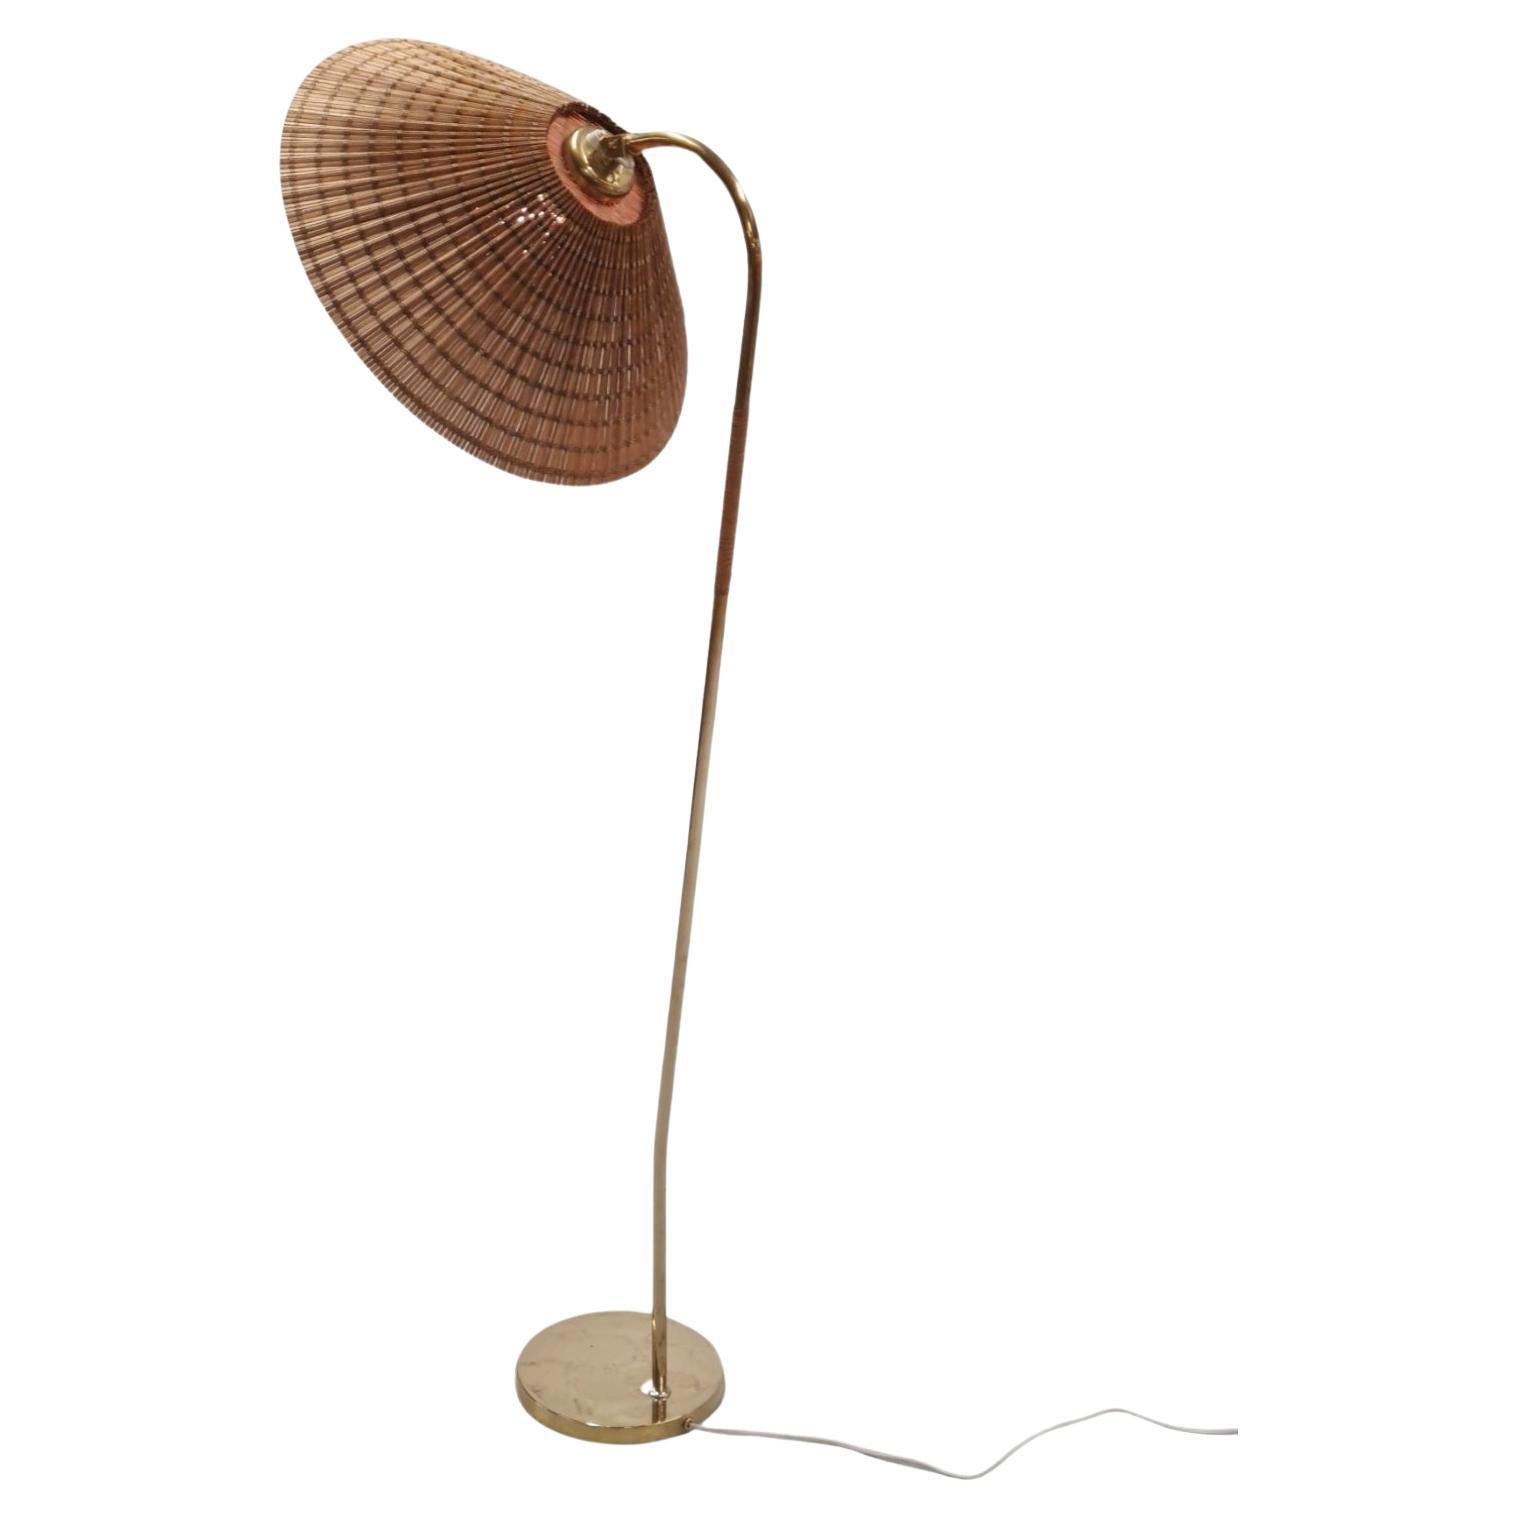 A rare and beautiful floor lamp in brass (rattan on the stem) and rattan shade, designed by Gunnel Nyman and manufactured by Idman. This was often mistaken for a Tynell due to very little documentation, but as the Design Museum recently aquired and